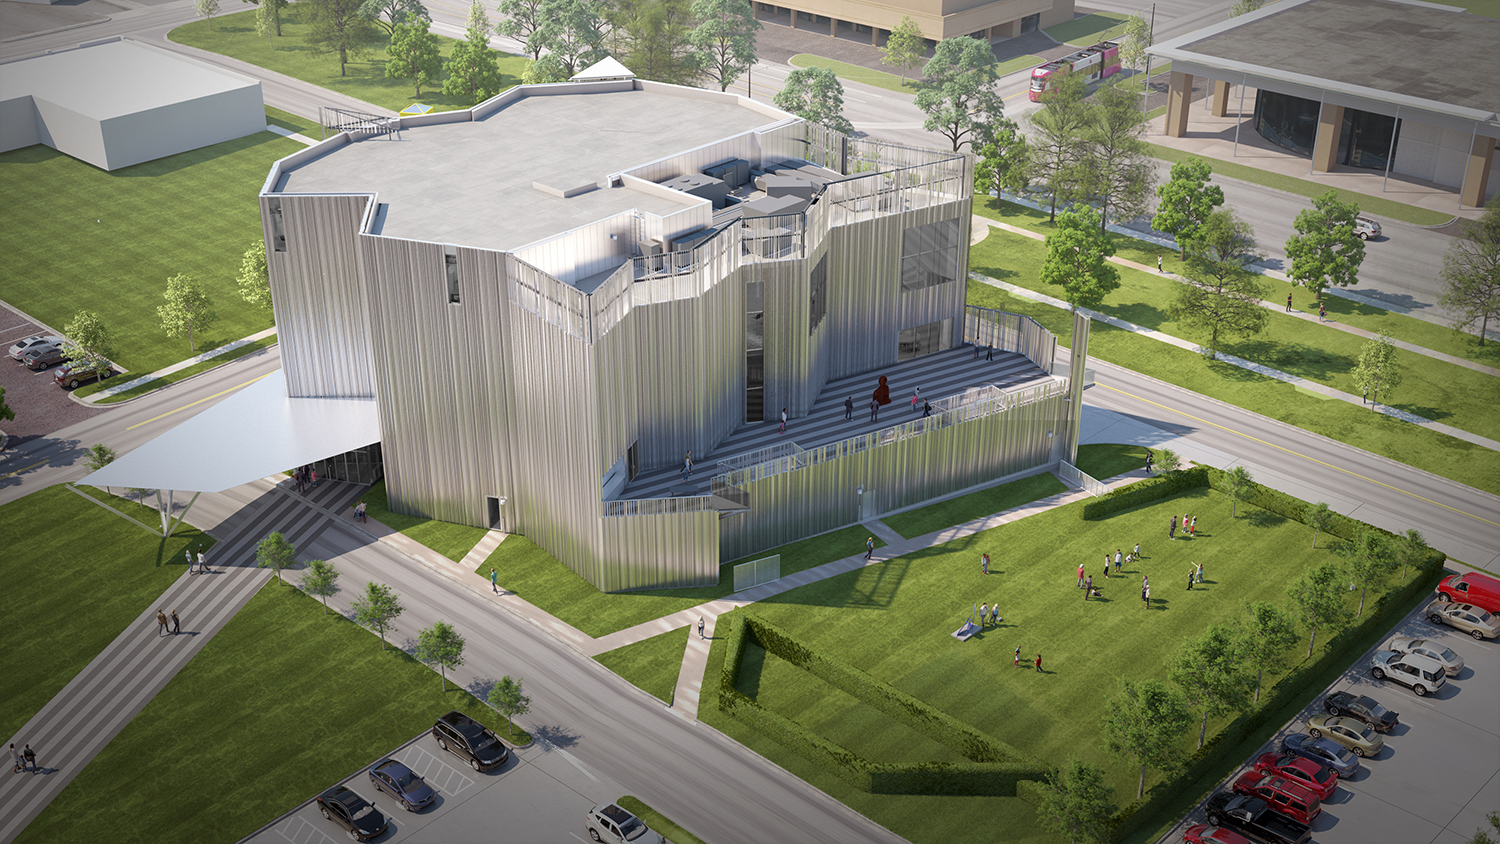 Rendering of a craggy building clad in metal panels, the new Oklahoma Contemporary Center for the Arts